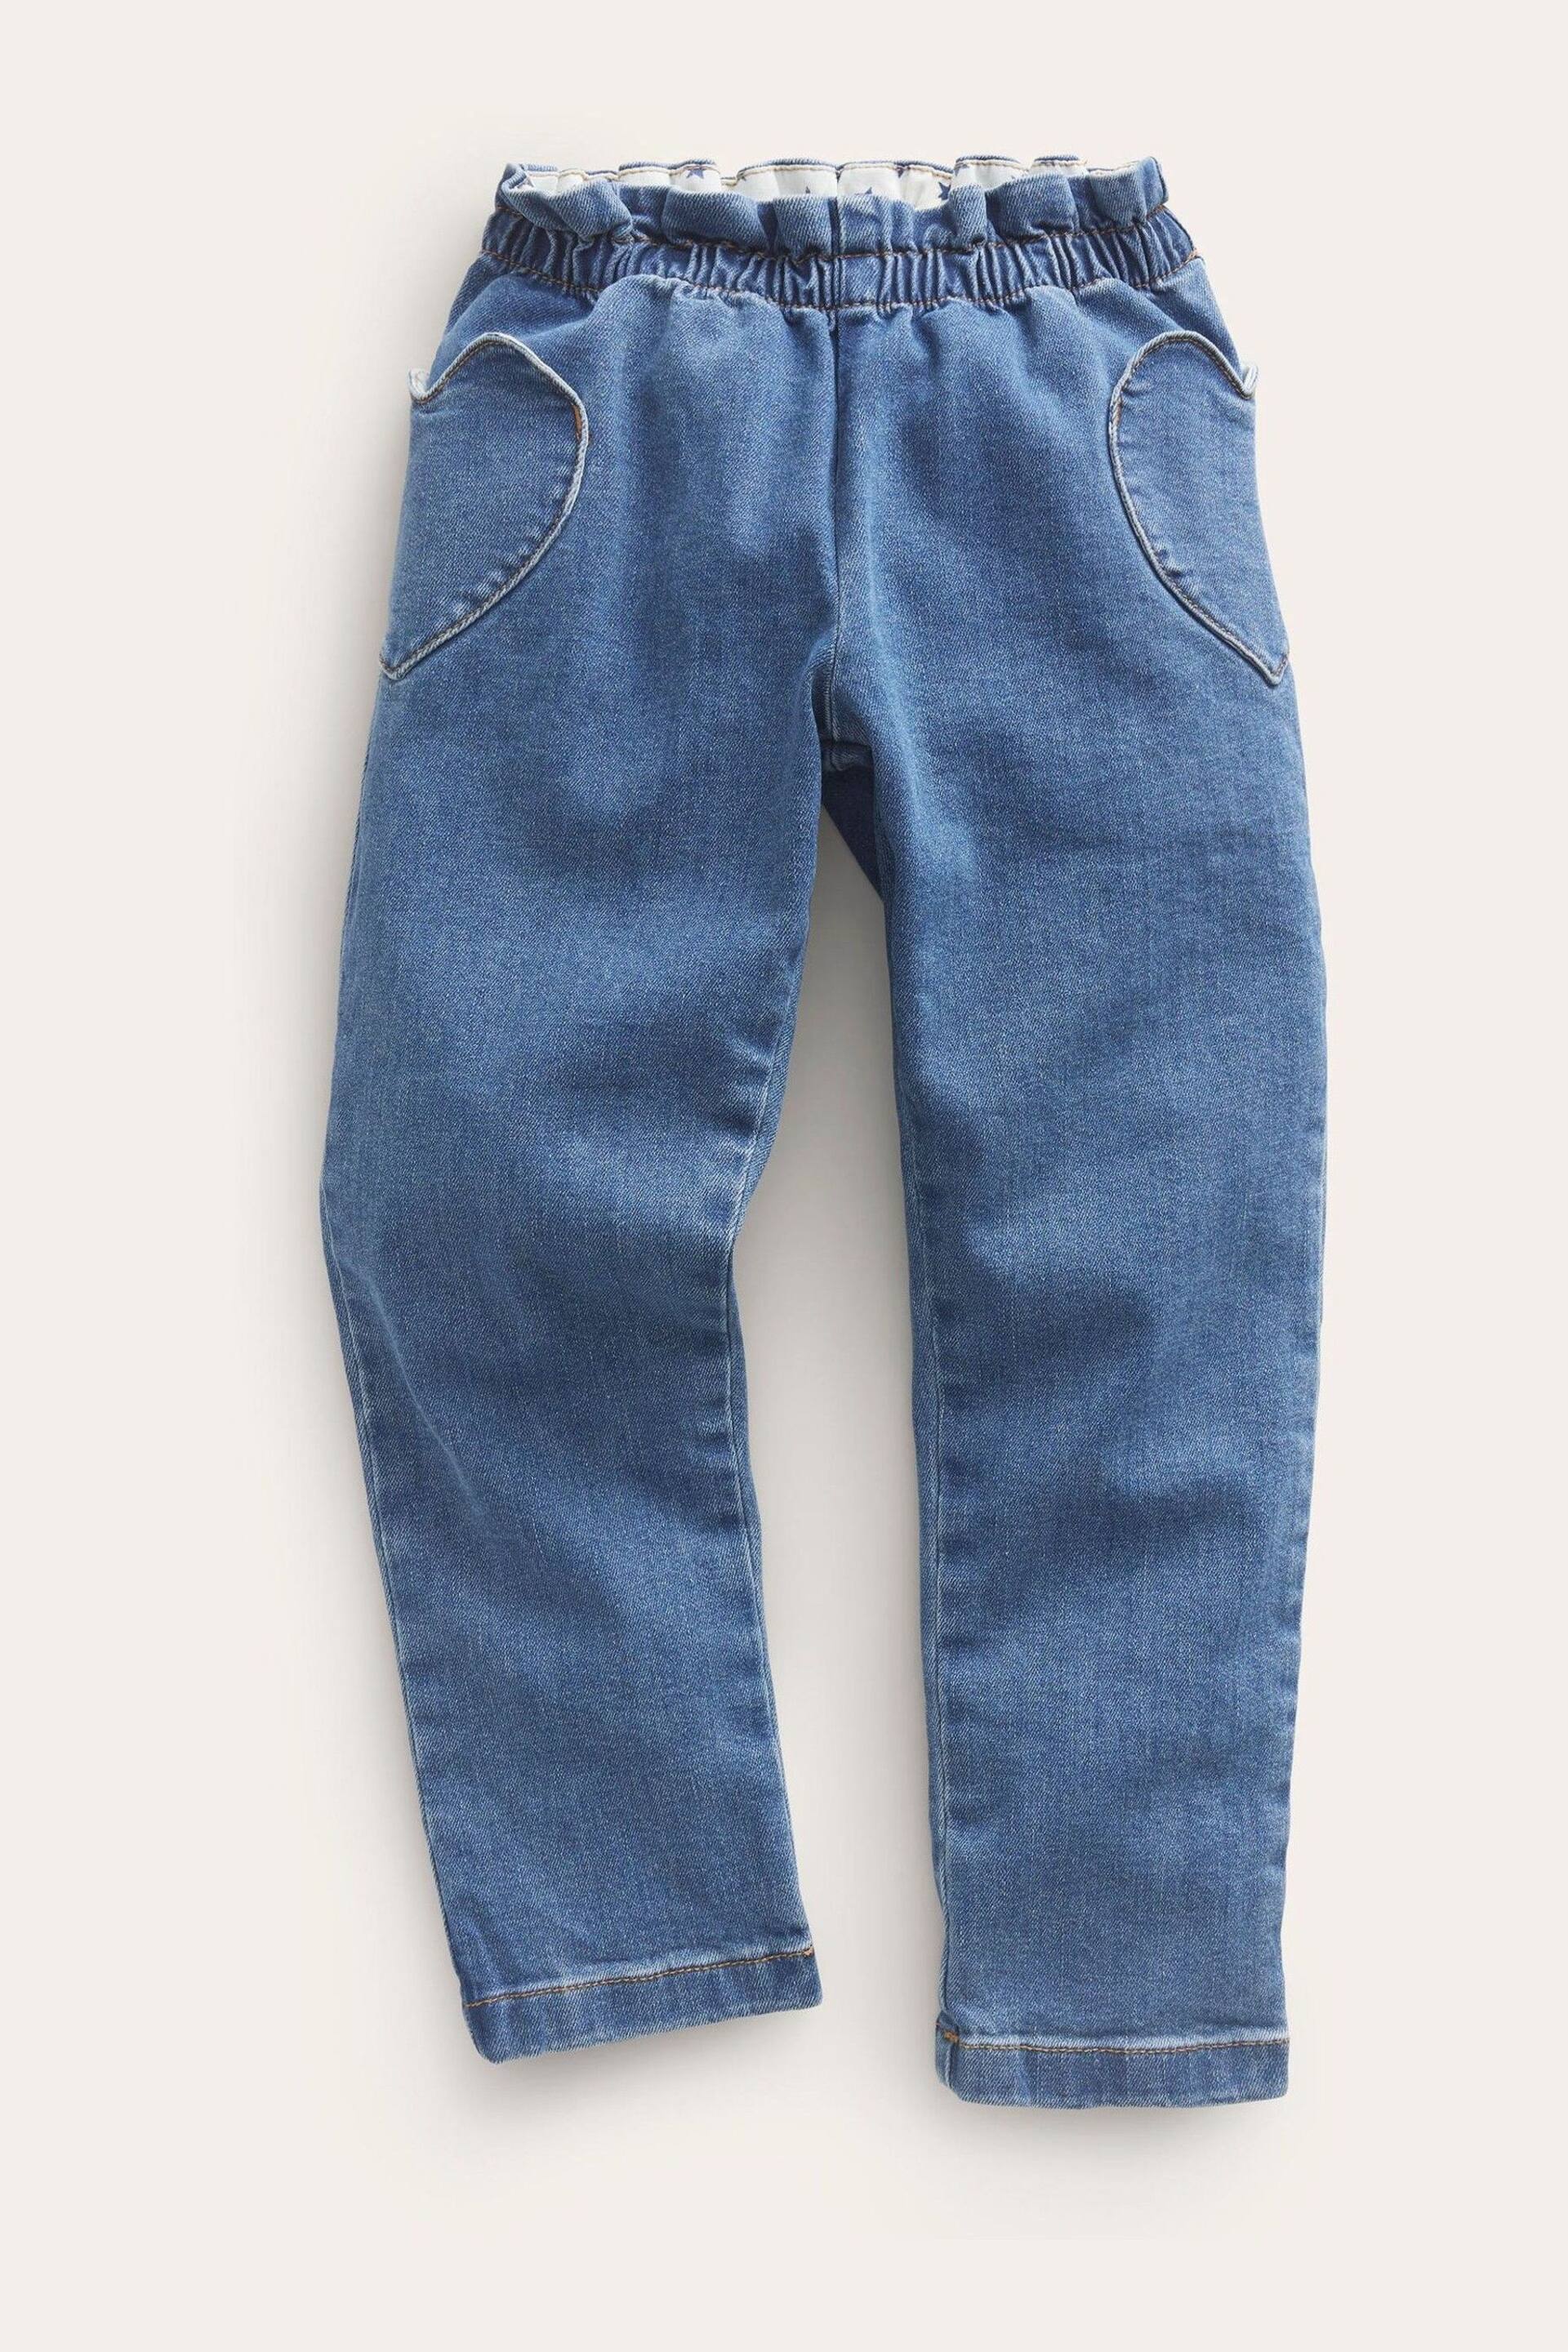 Boden Blue Denim Pull-On Trousers - Image 3 of 5